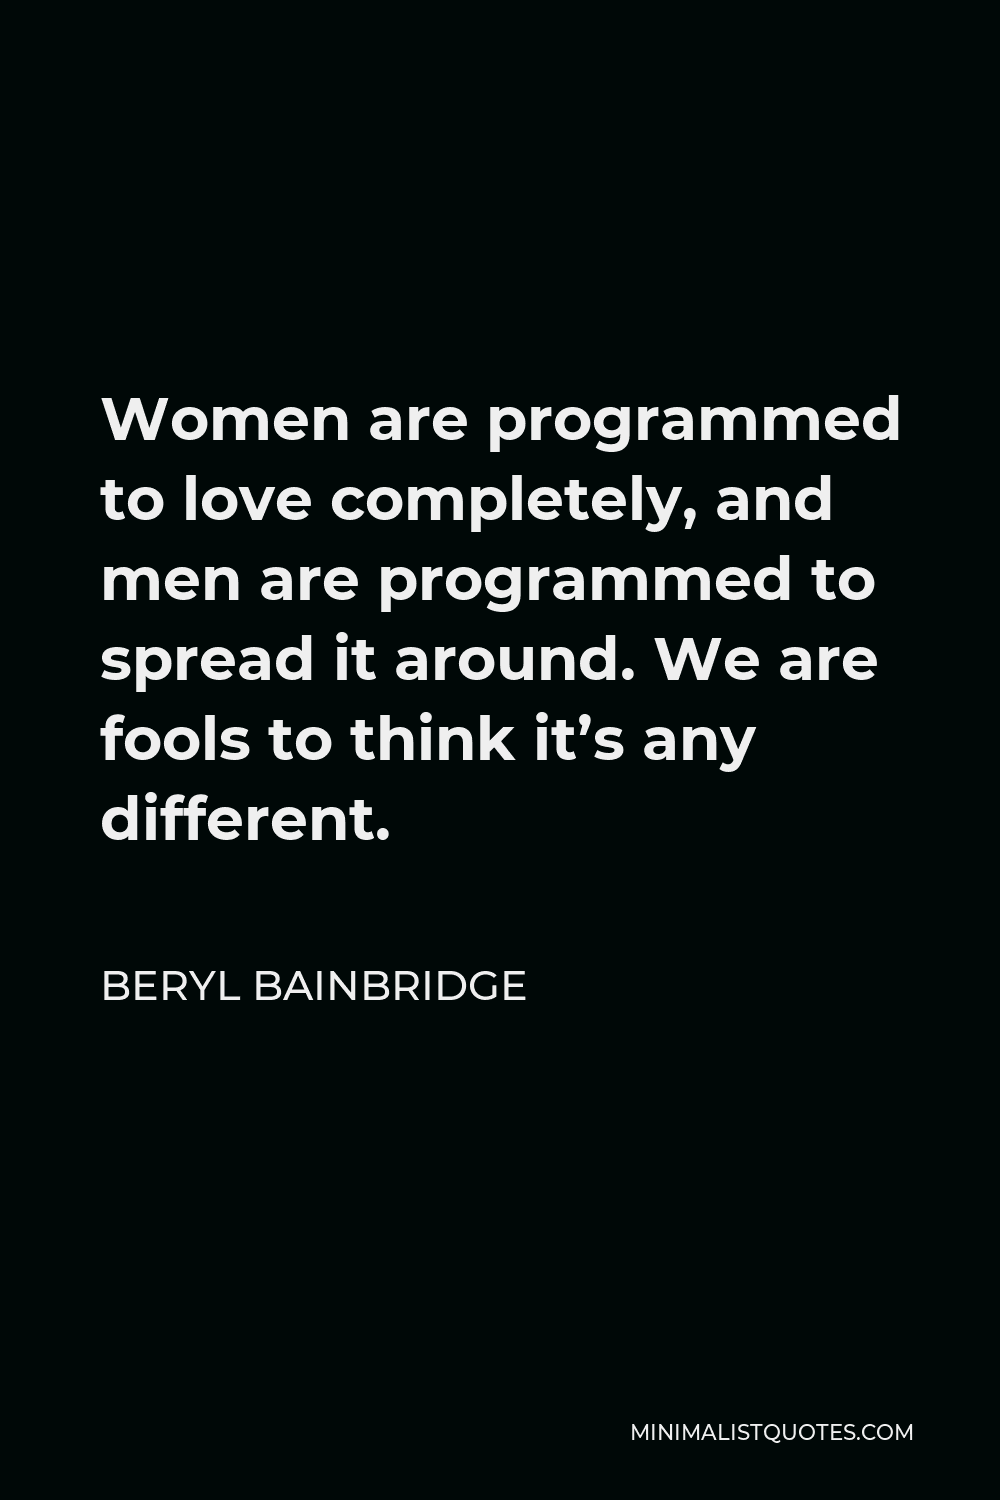 Beryl Bainbridge Quote - Women are programmed to love completely, and men are programmed to spread it around. We are fools to think it’s any different.